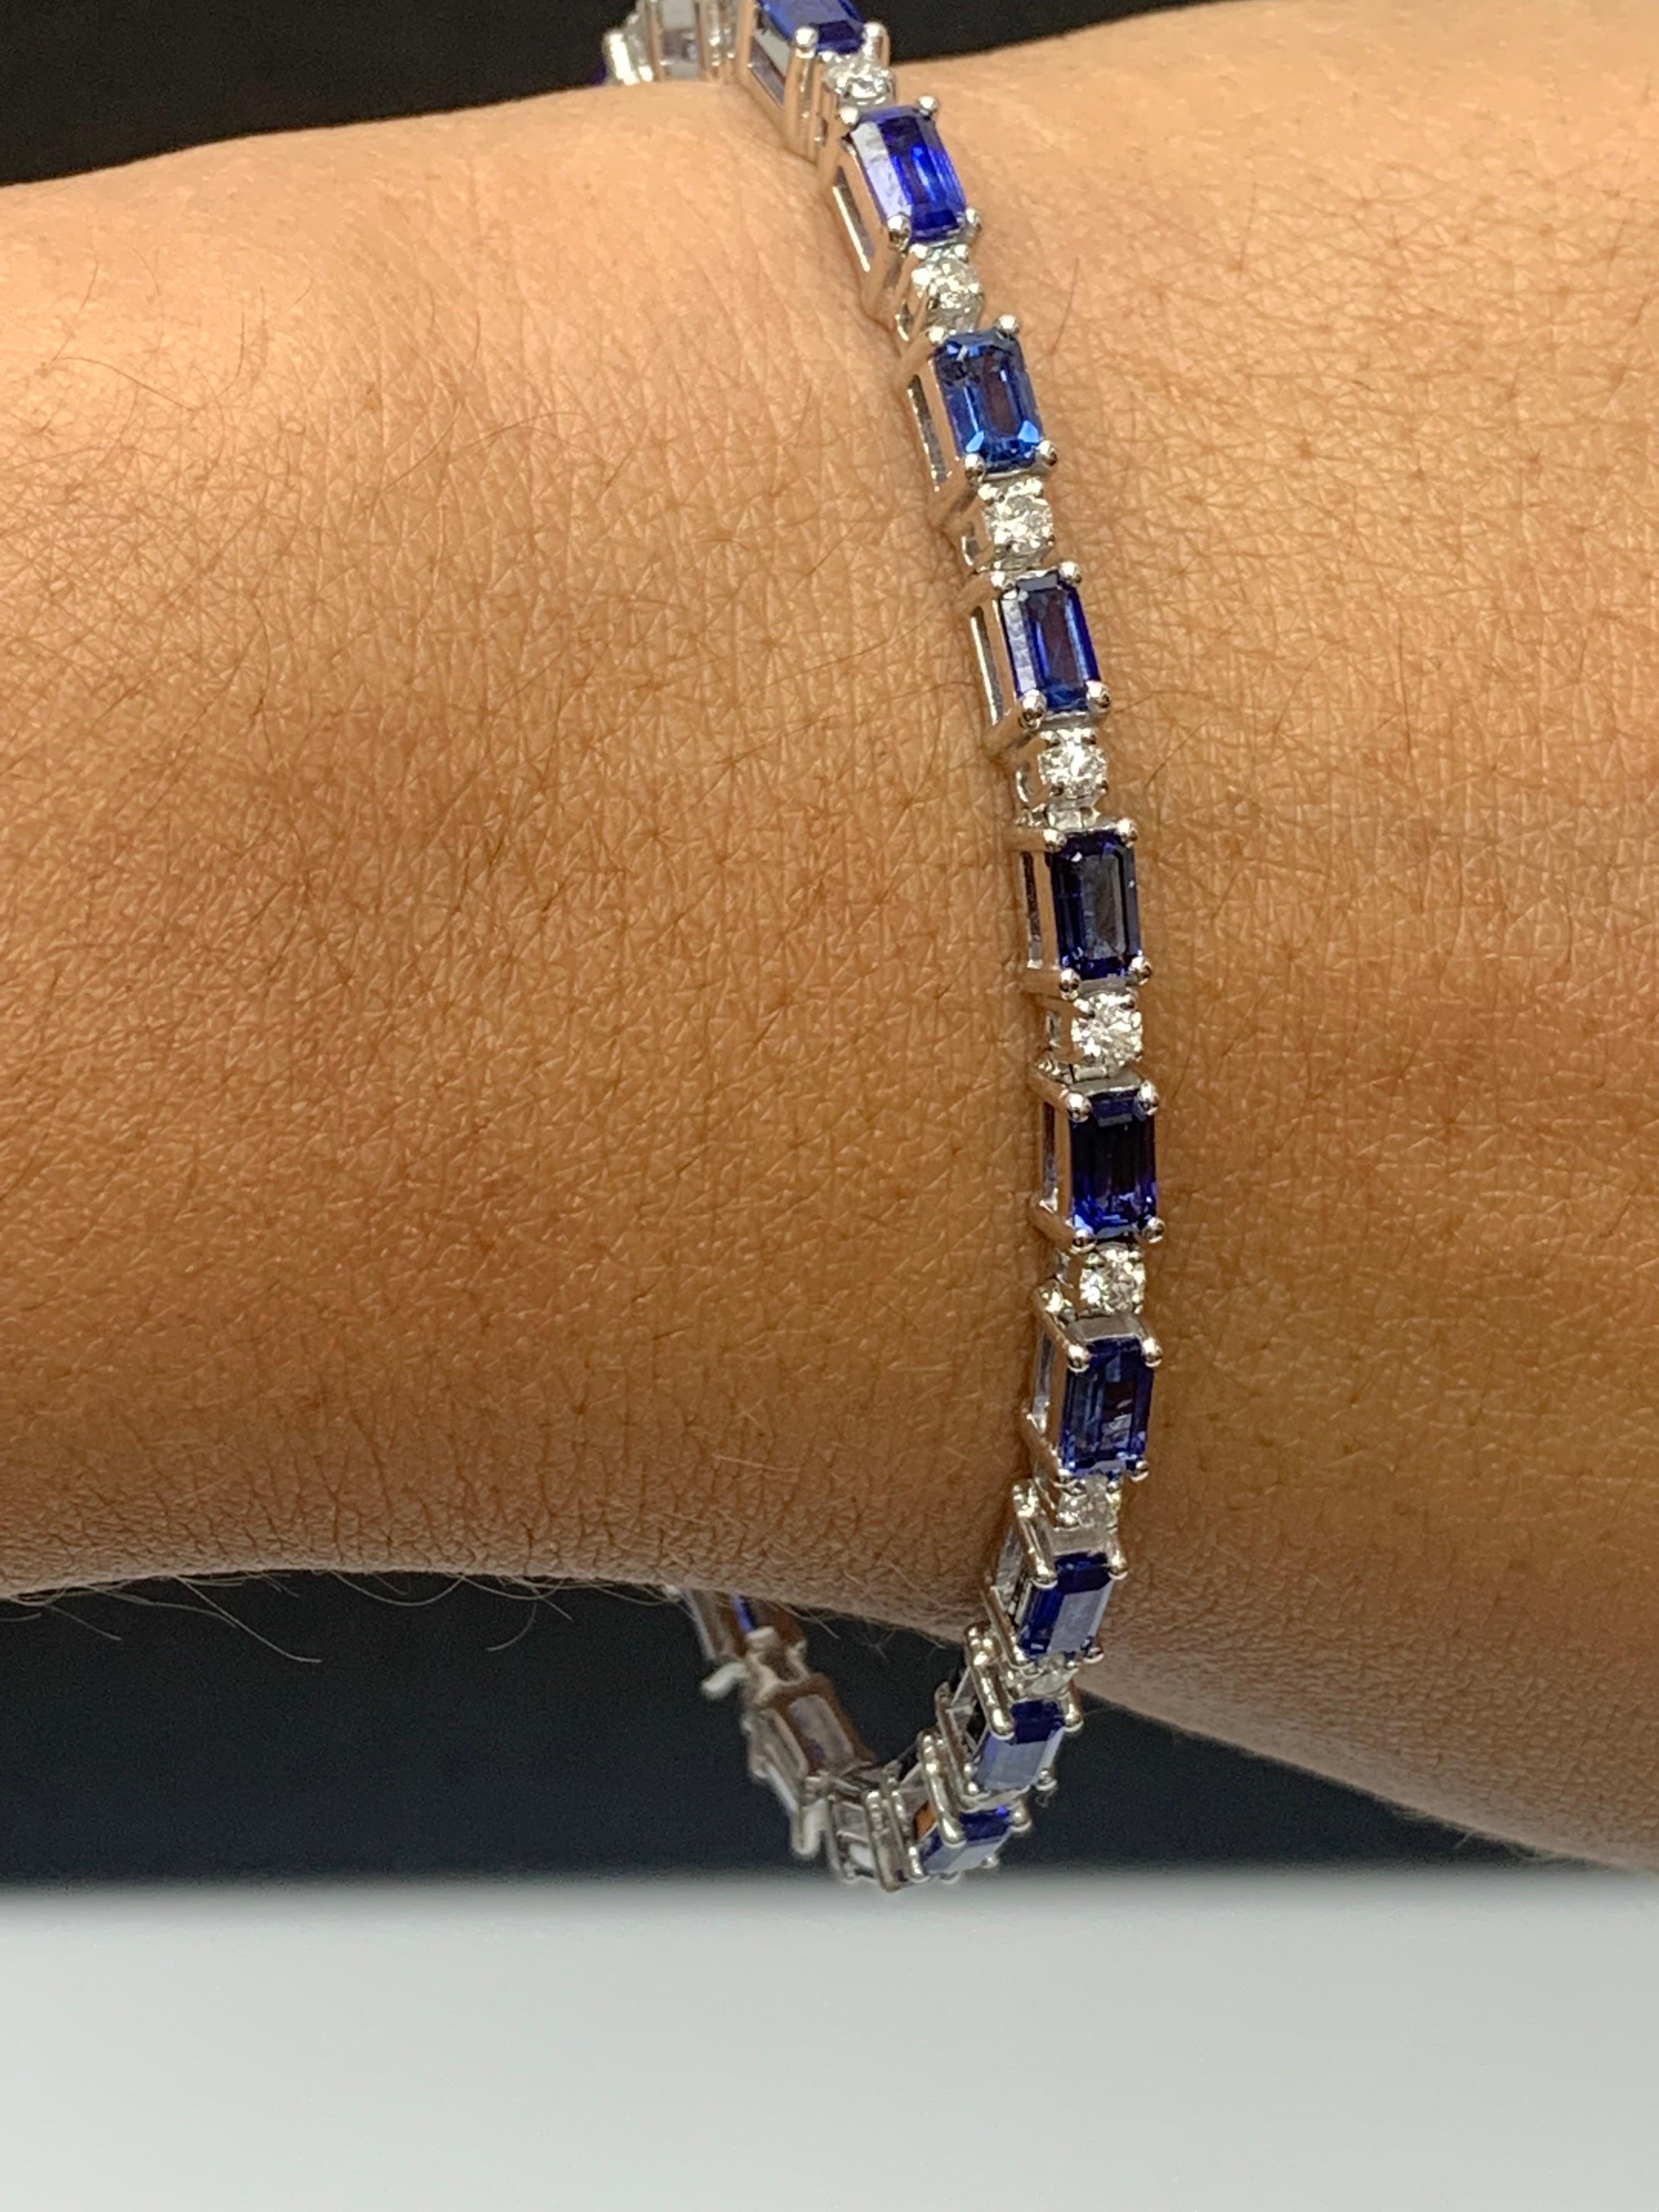 7.17 Carat Emerald Cut Blue Sapphire and Diamond Bracelet in 14K White Gold For Sale 3